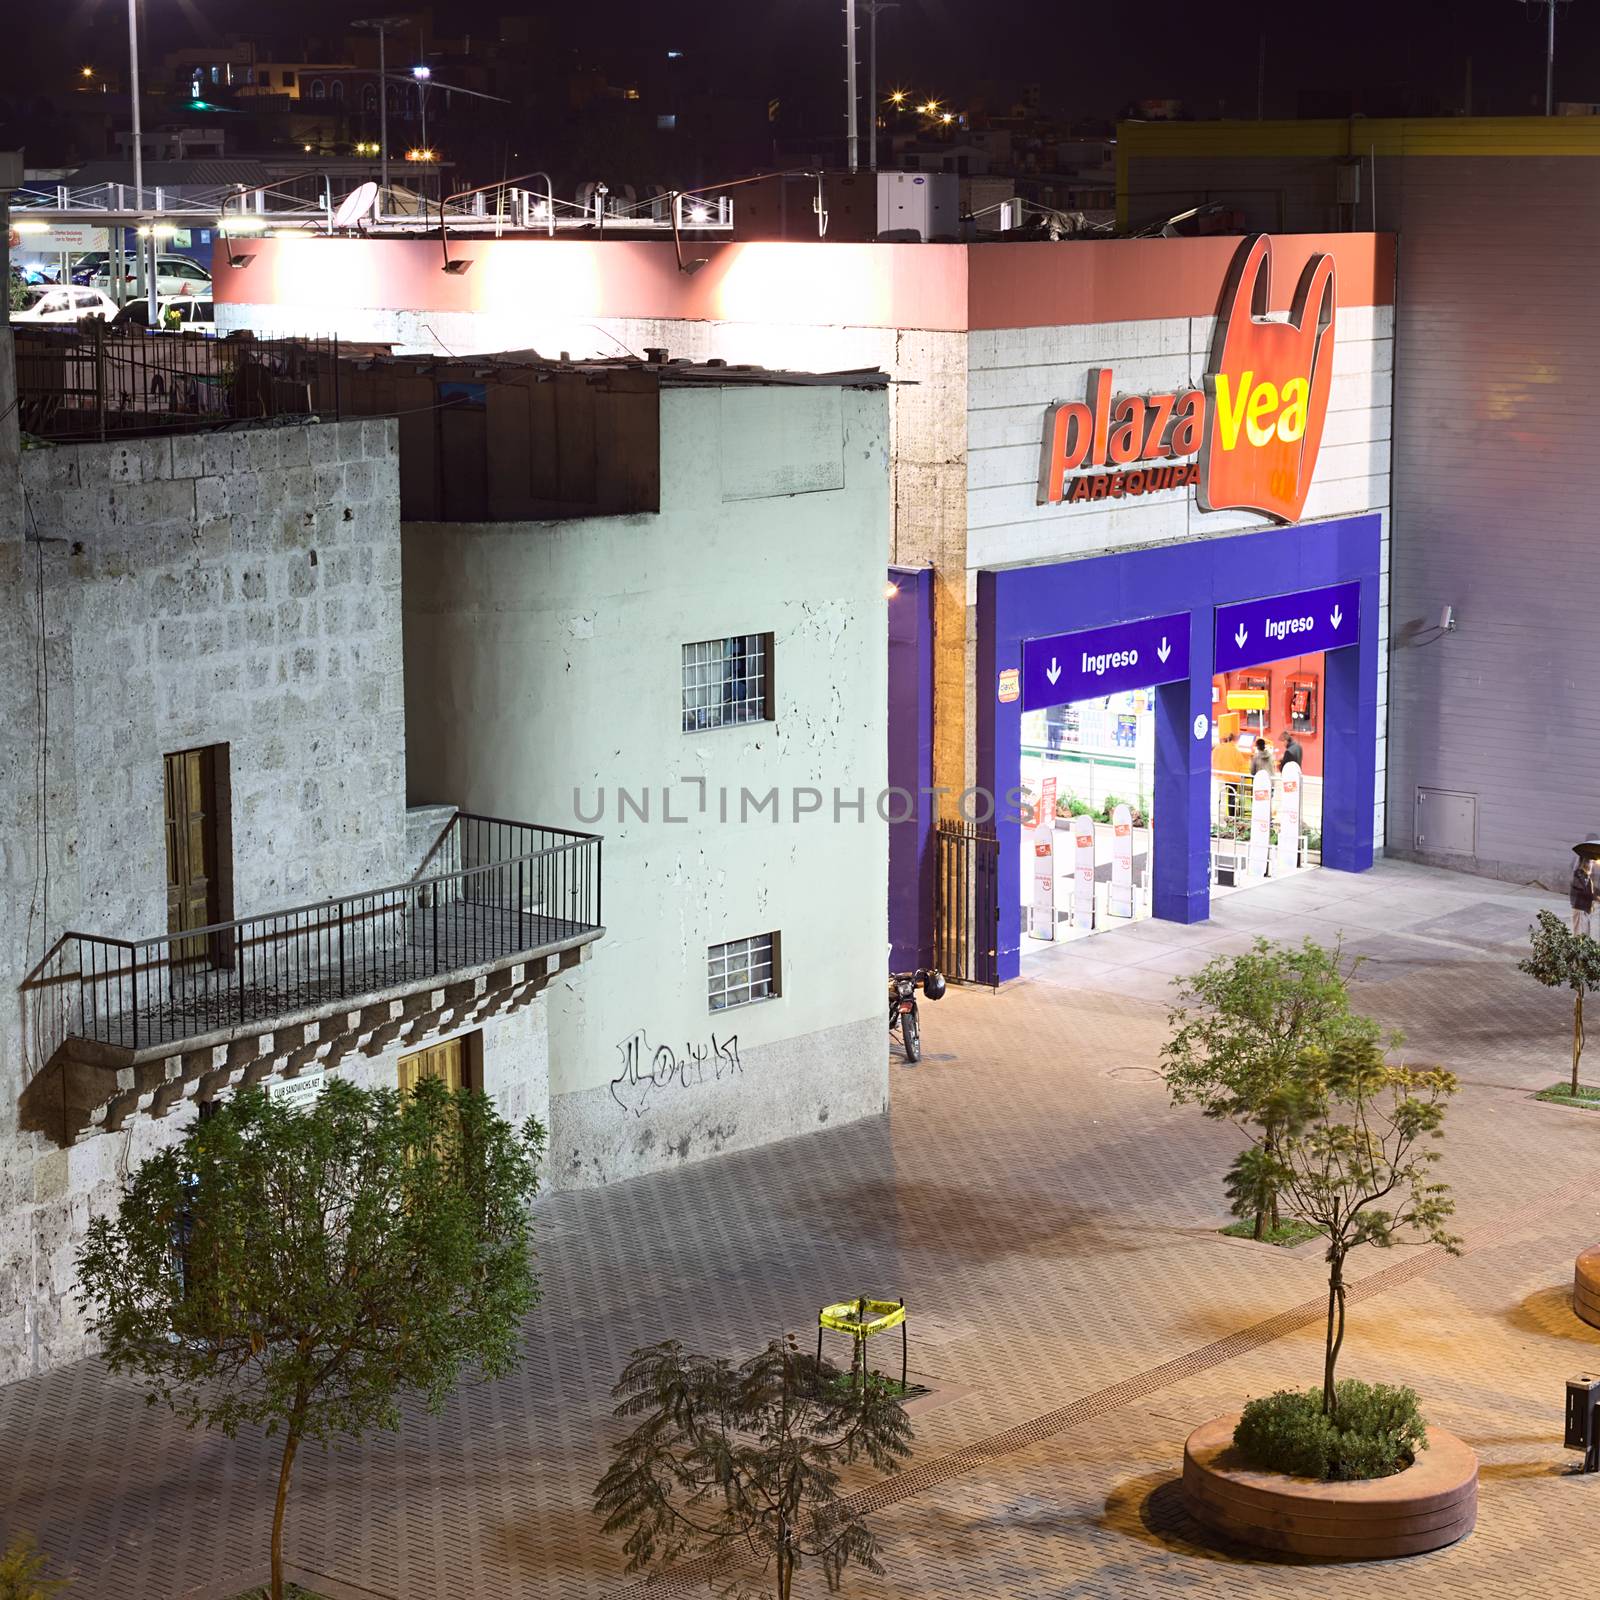 AREQUIPA, PERU - AUGUST 14, 2014: Entrance of Plaza Vea supermarket on La Marina street in the evening on August 14, 2014 in Arequipa, Peru. Plaza Vea is the largest supermarket chain in Peru and is part of Supermercados Peruanos S.A.